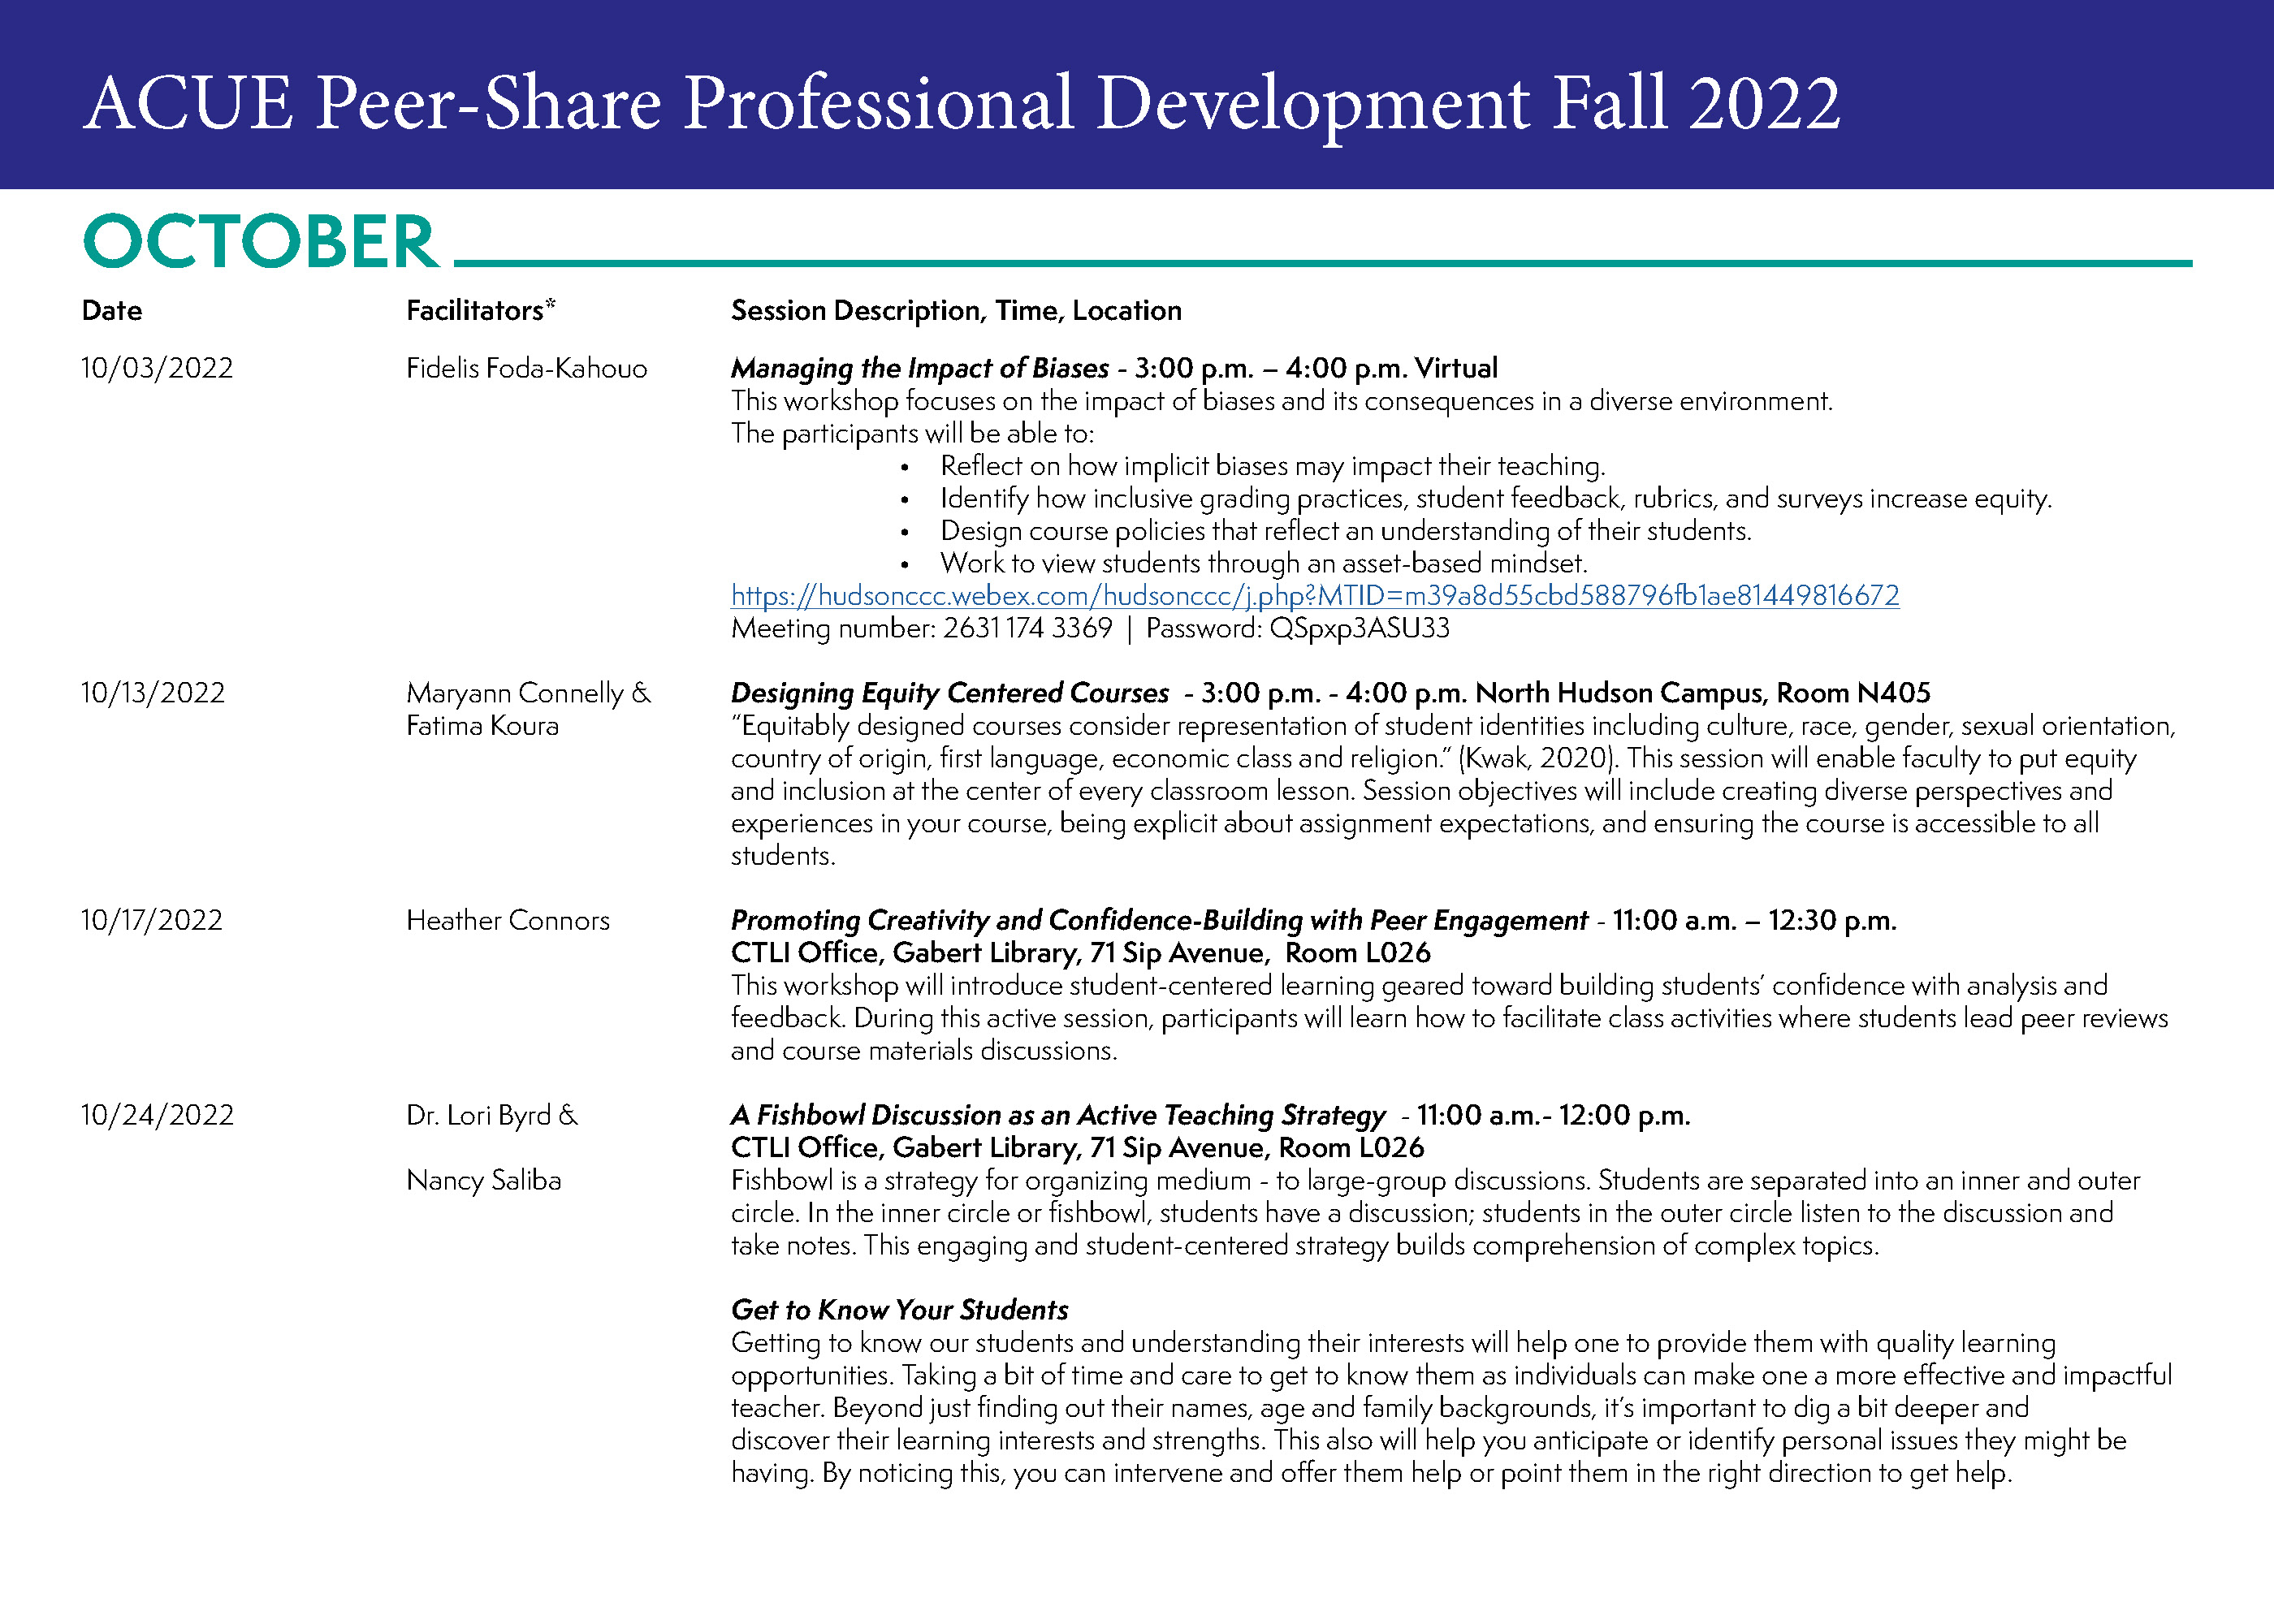 ACUE Peer-Share Professional Development Fall 2022 - October Schedule